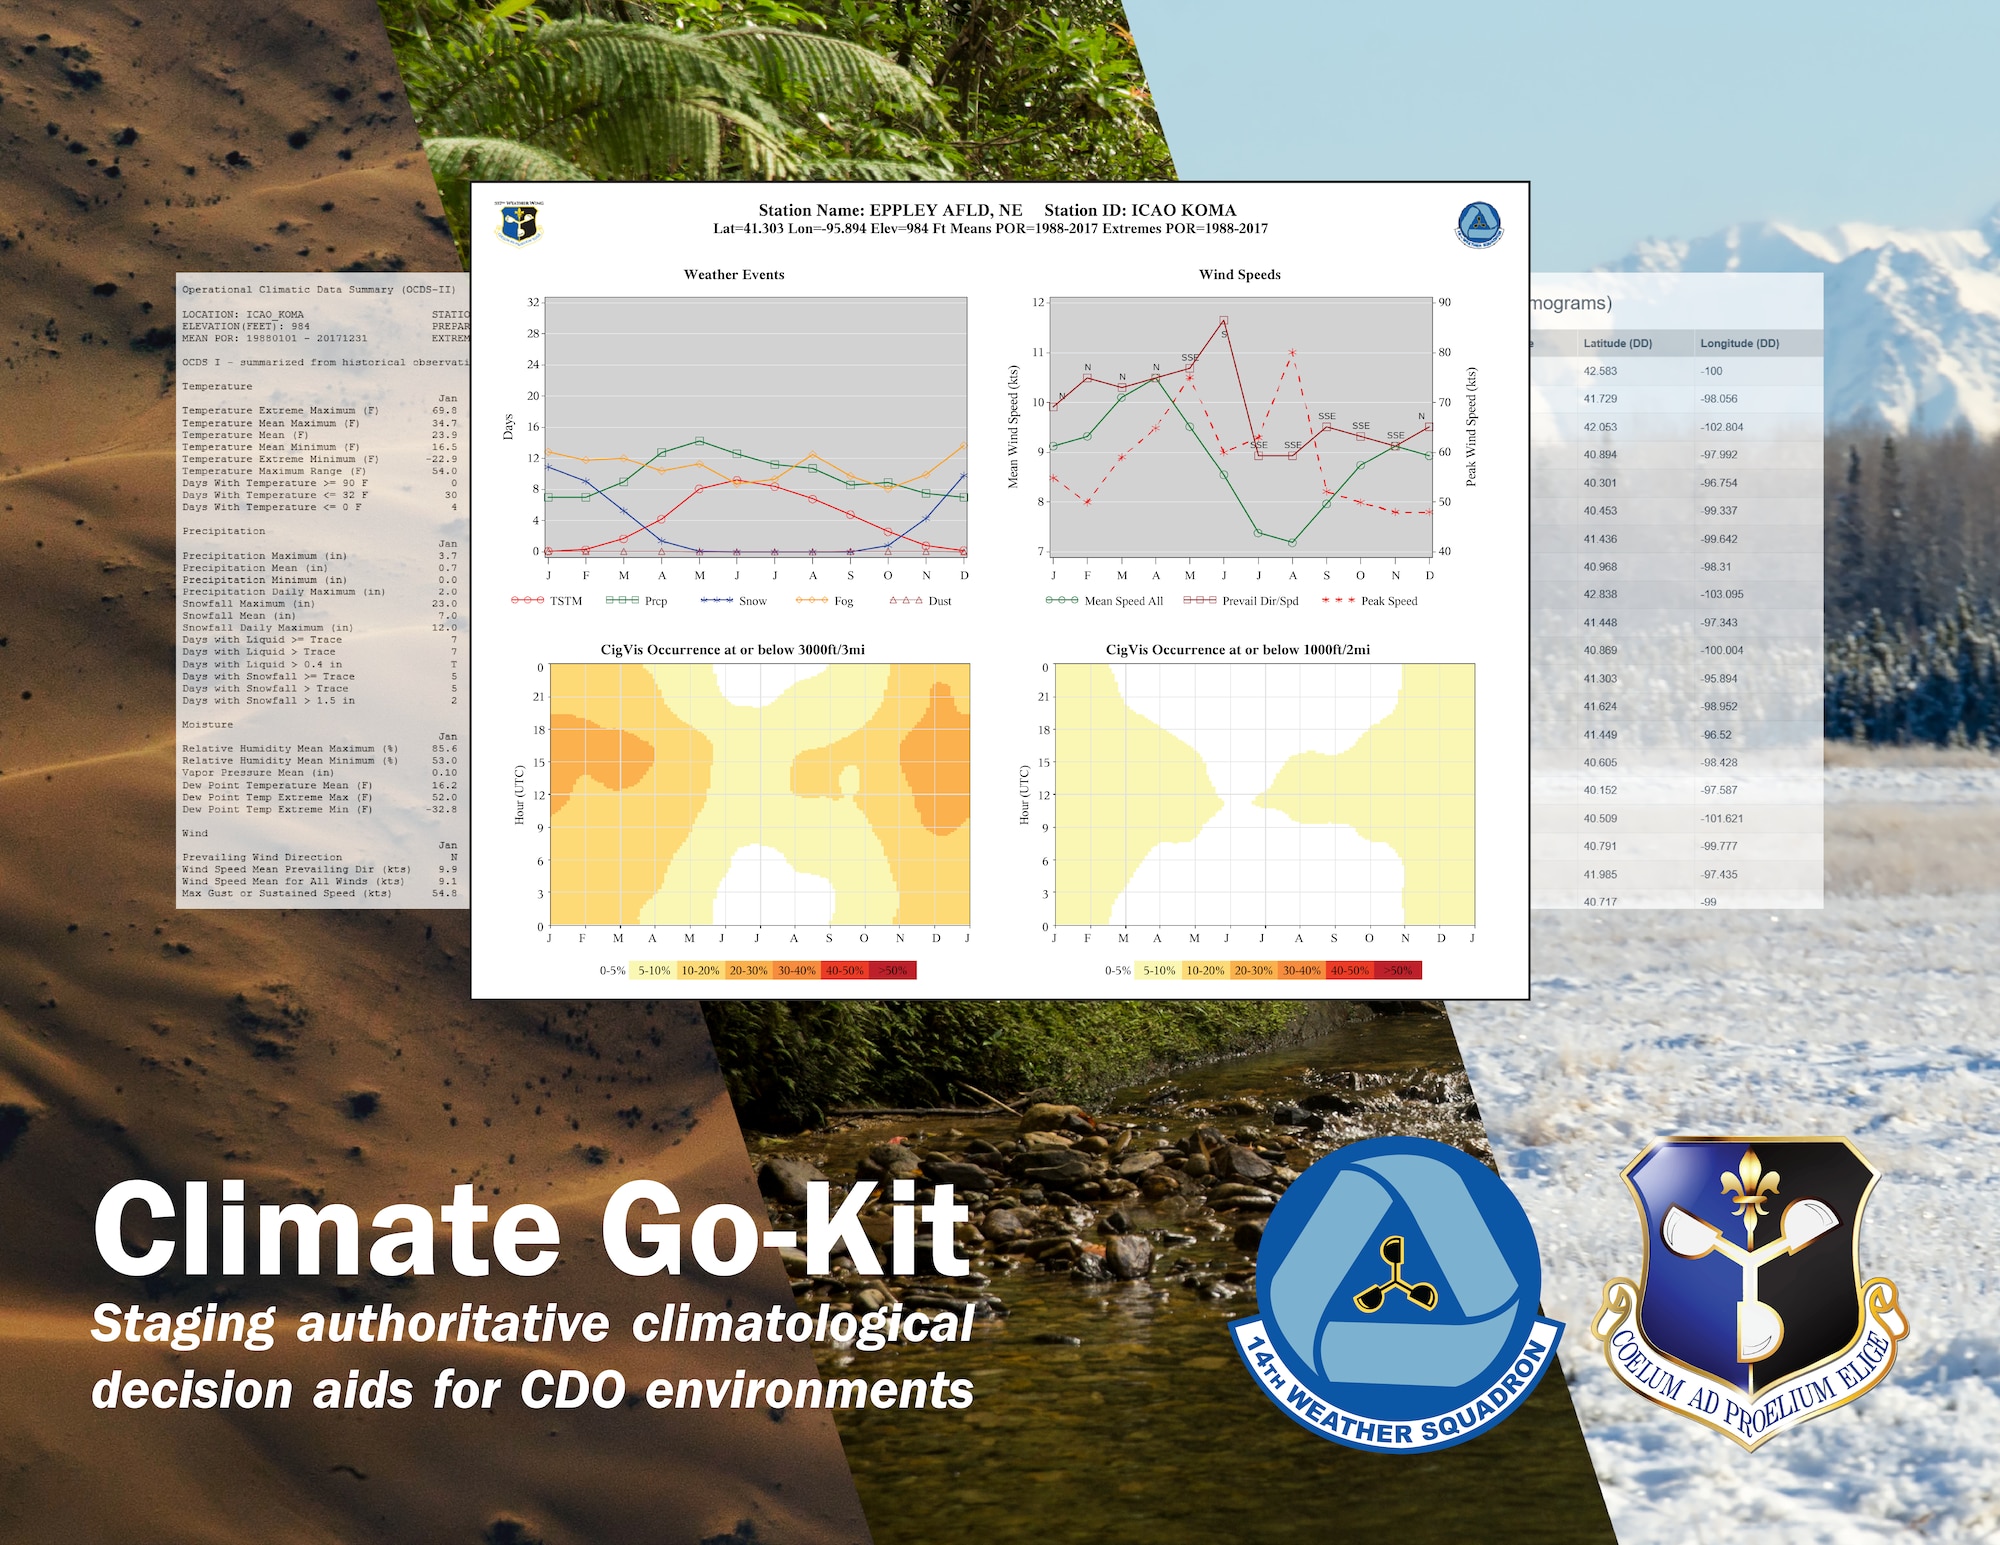 Illustration showing web pages from the 14th Weather Squadron’s (WS) Climate Go-Kit, Feb. 19, 2019. The 14th WS created the Climate Go-Kit to allow weather forecasters to prepare for operations in a Contested, Degraded or Operationally-limited, known as CDO, environment. (U.S. Air Force illustration by Paul Shirk, photos courtesy of Department of Defense)